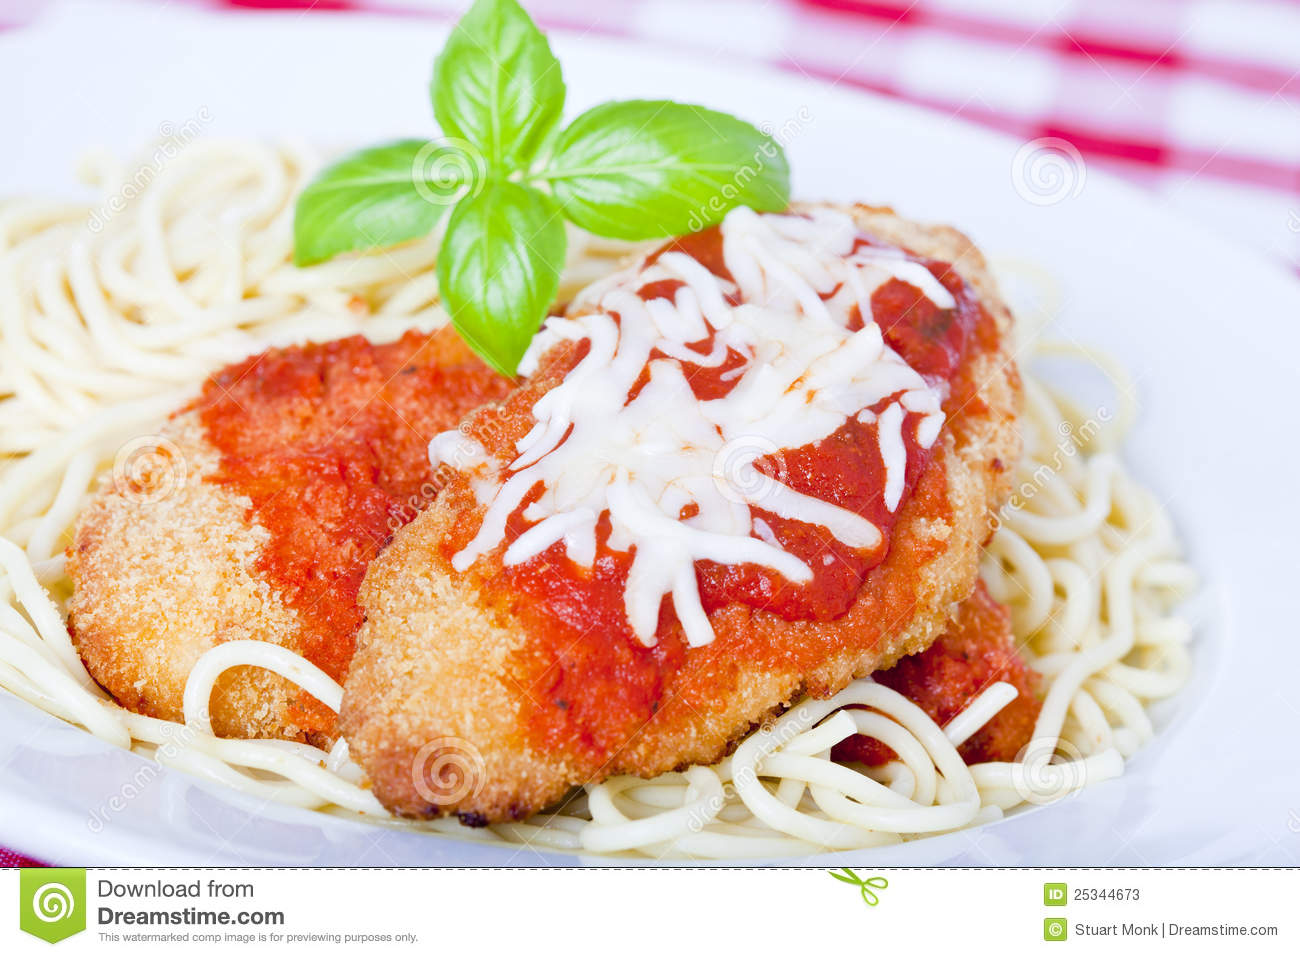 Chicken Parmigiana On A White Plate With Spaghetti